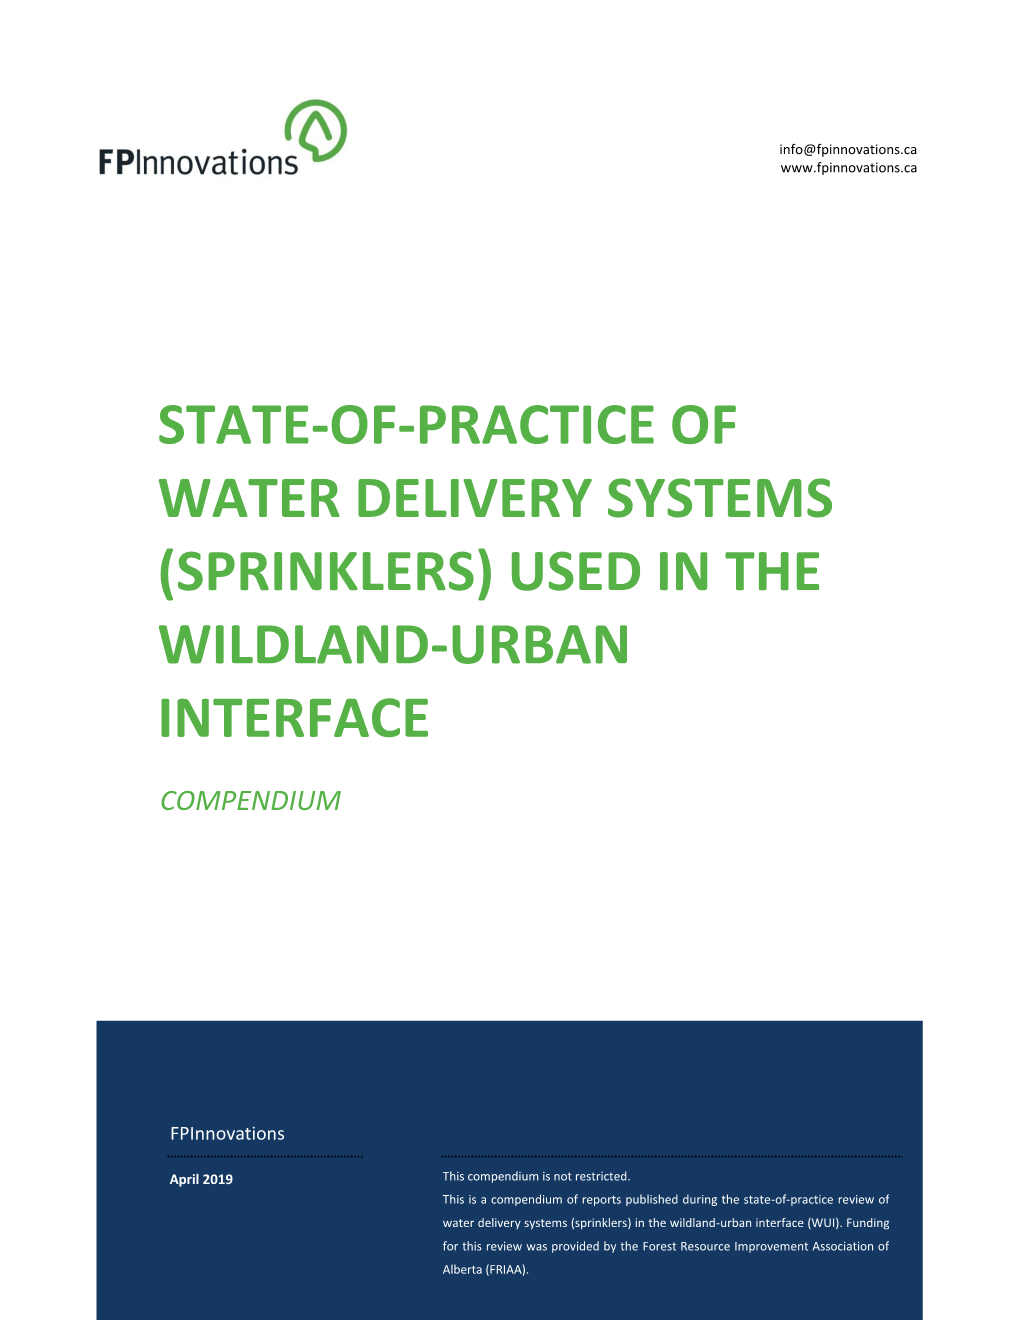 State-Of-Practice of Water Delivery Systems (Sprinklers) Used in the Wildland-Urban Interface